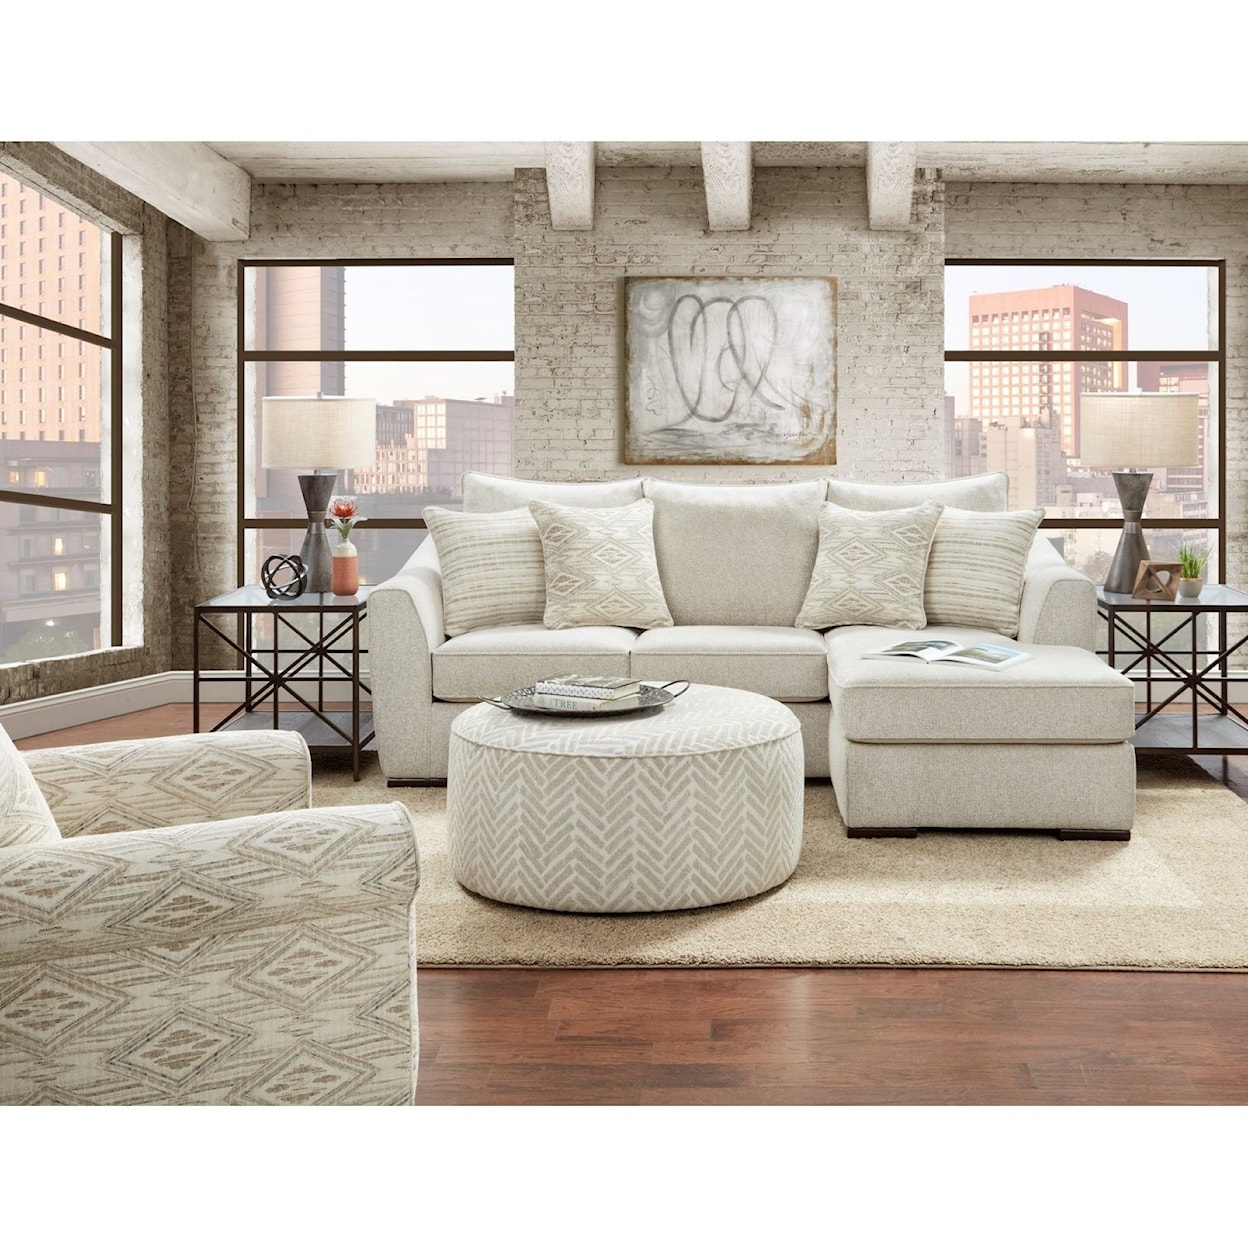 Finity Ryker Accent Chair